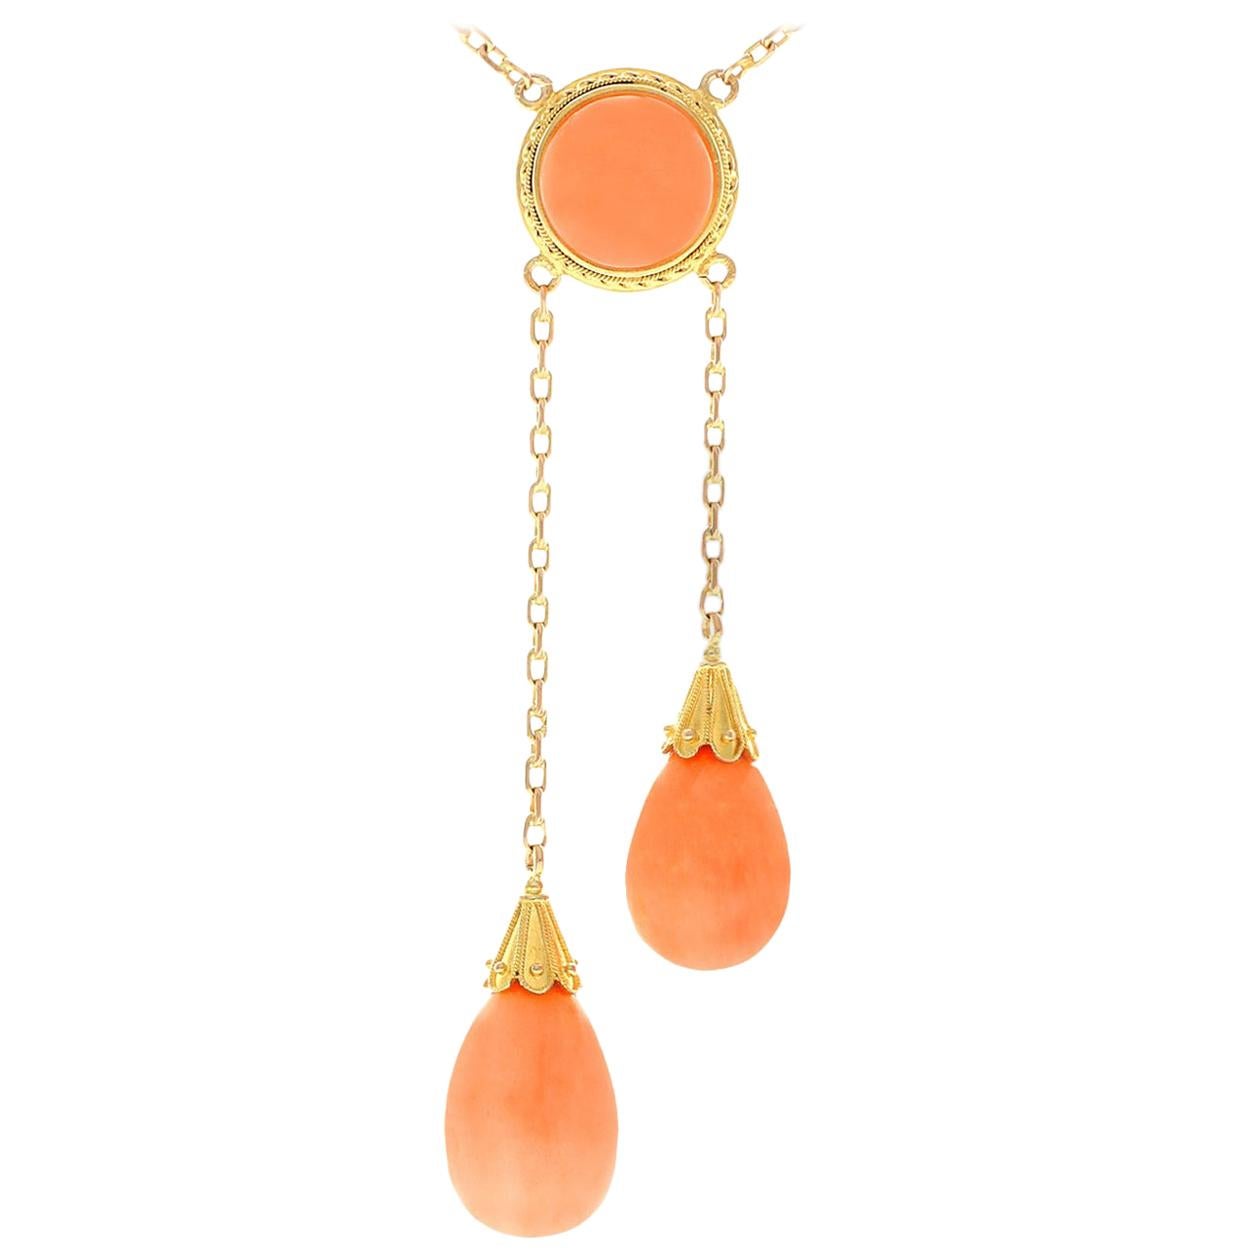 Antique Victorian 35.22 Carat Coral and Yellow Gold Necklace